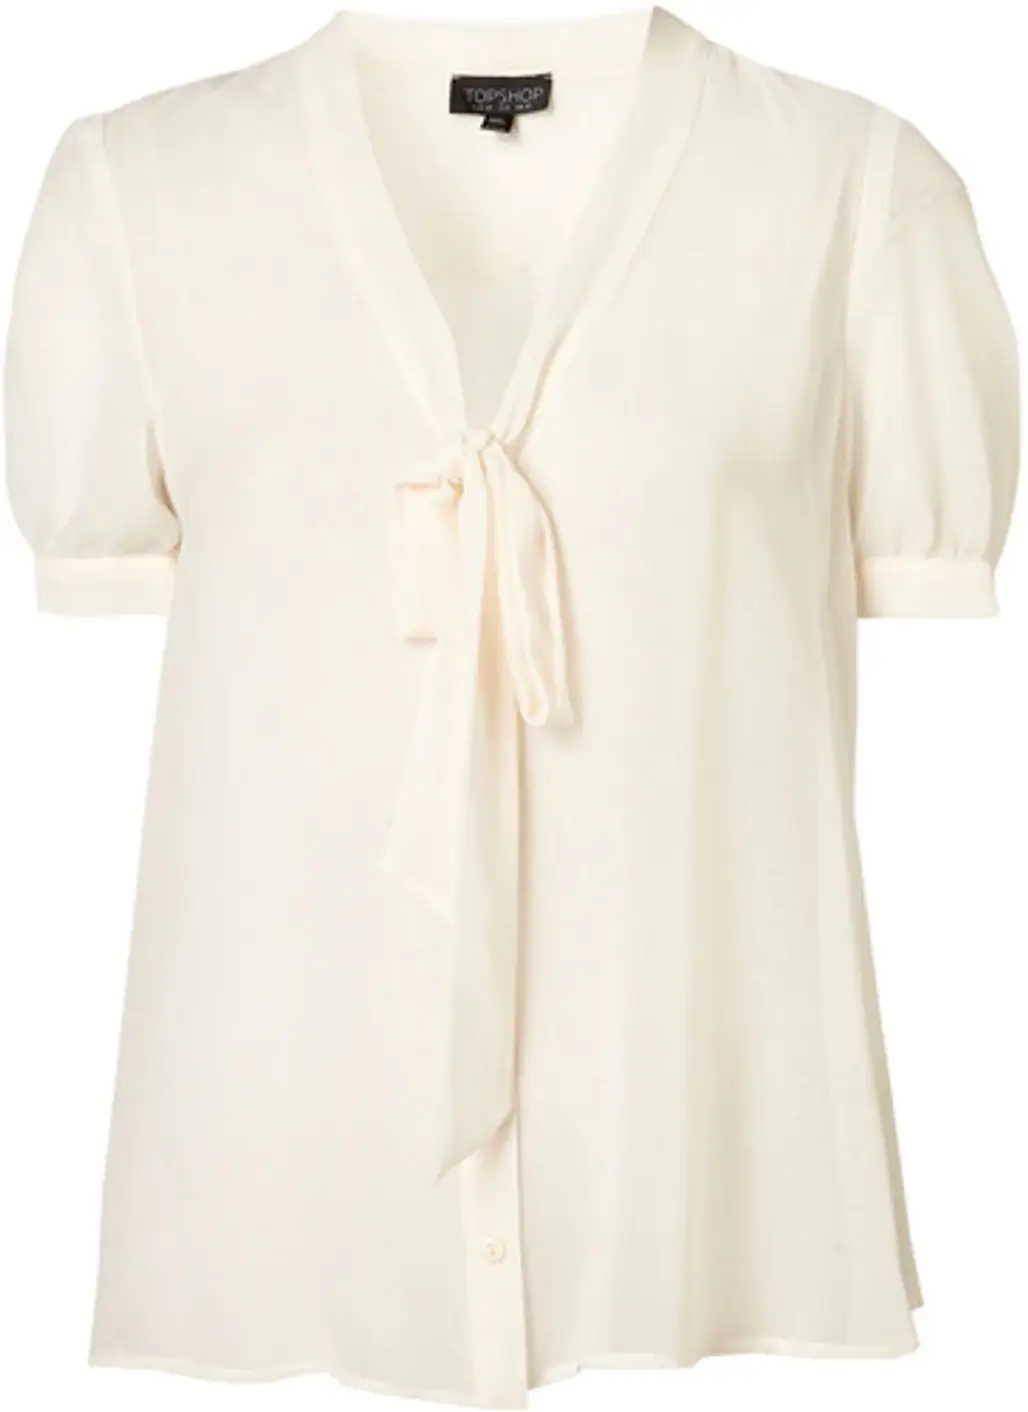 Topshop Short Sleeve Pussy Bow Blouse